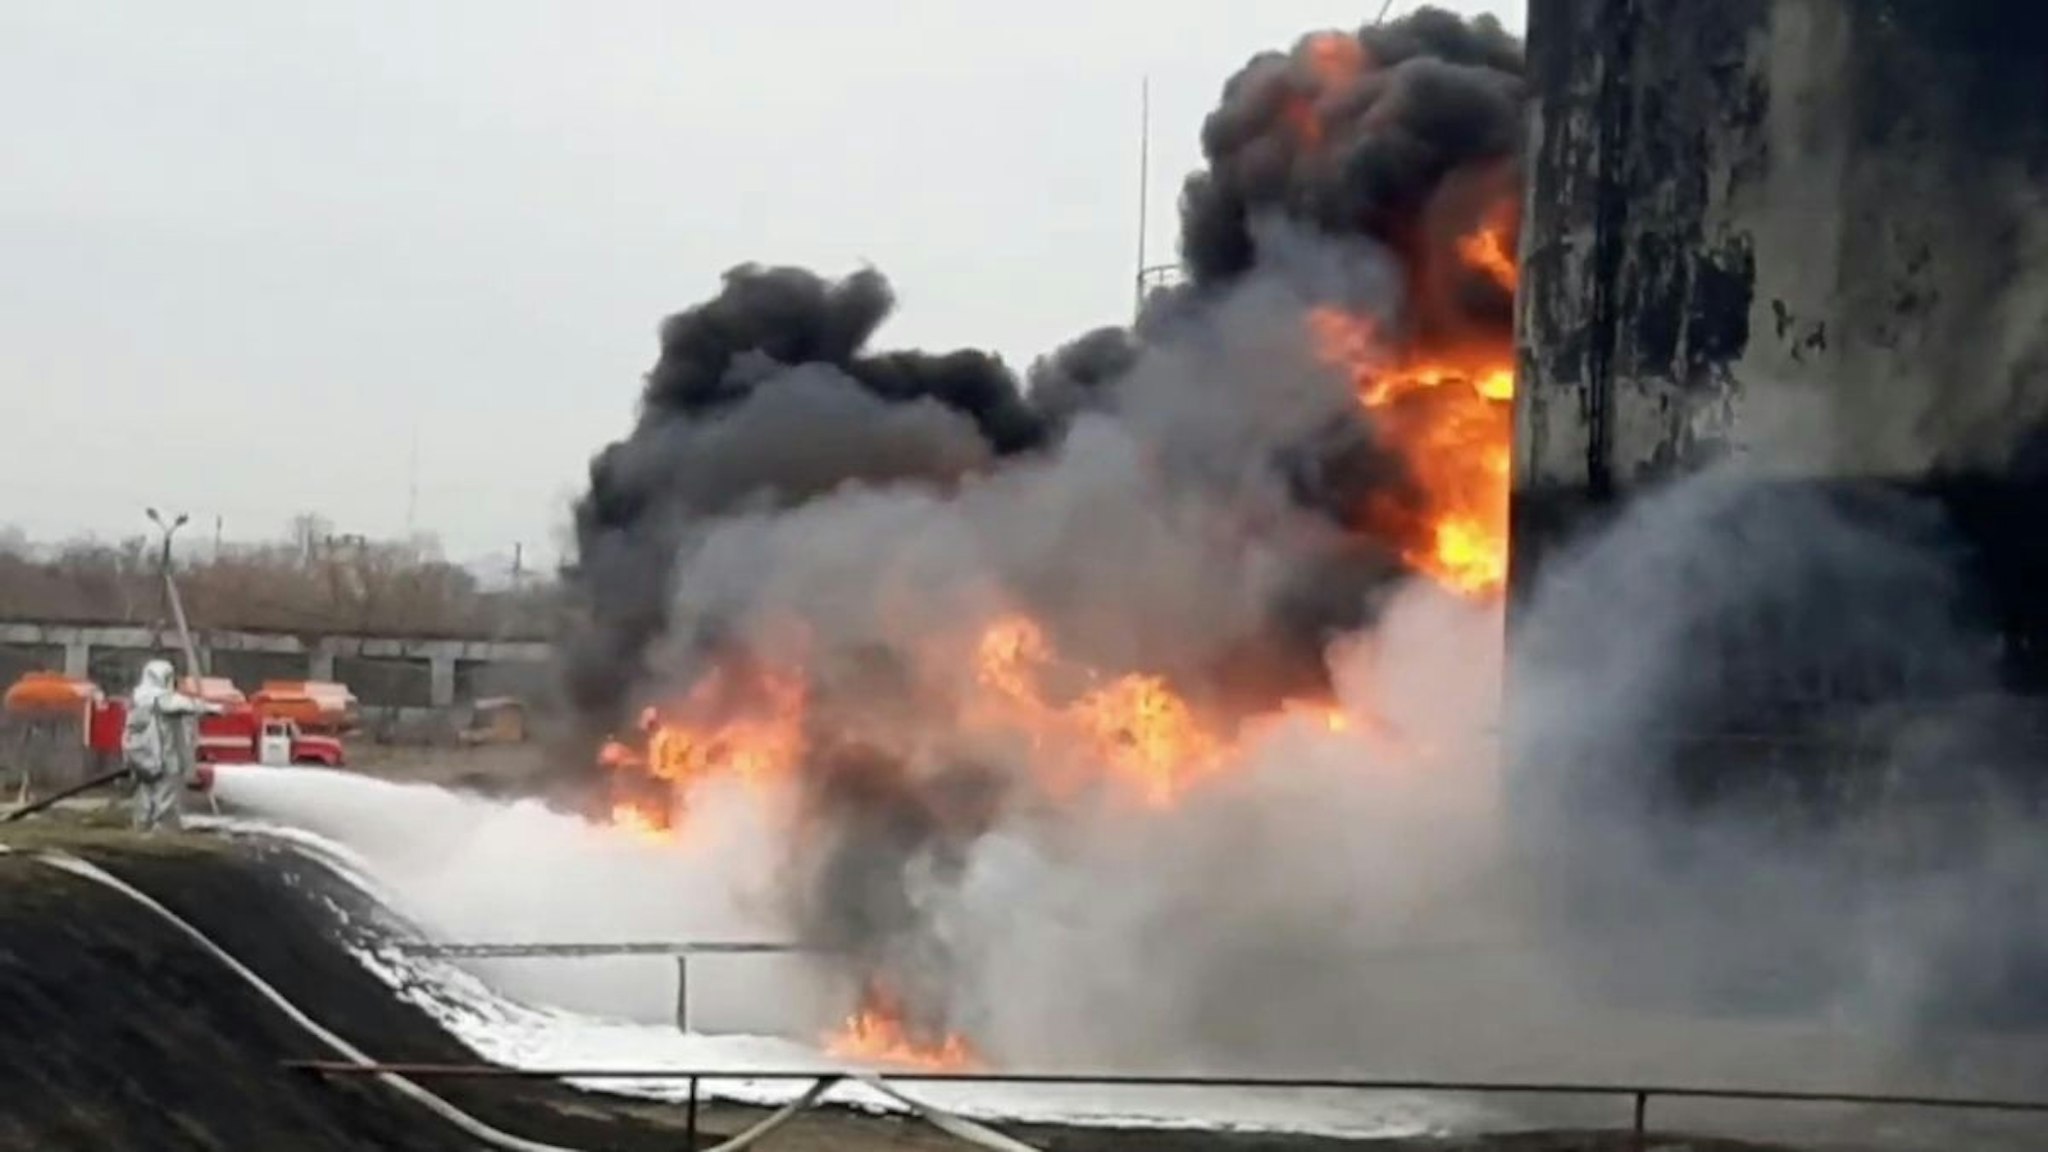 A screen grab captured from a video shows firefighters responding a fire, broke out after Ukranian military helicopters hit a fuel depot in the Russian city of Belgorod, Russiaâs governor of the Belgorod region Vyacheslav Gladkov said, on April 1, 2022.